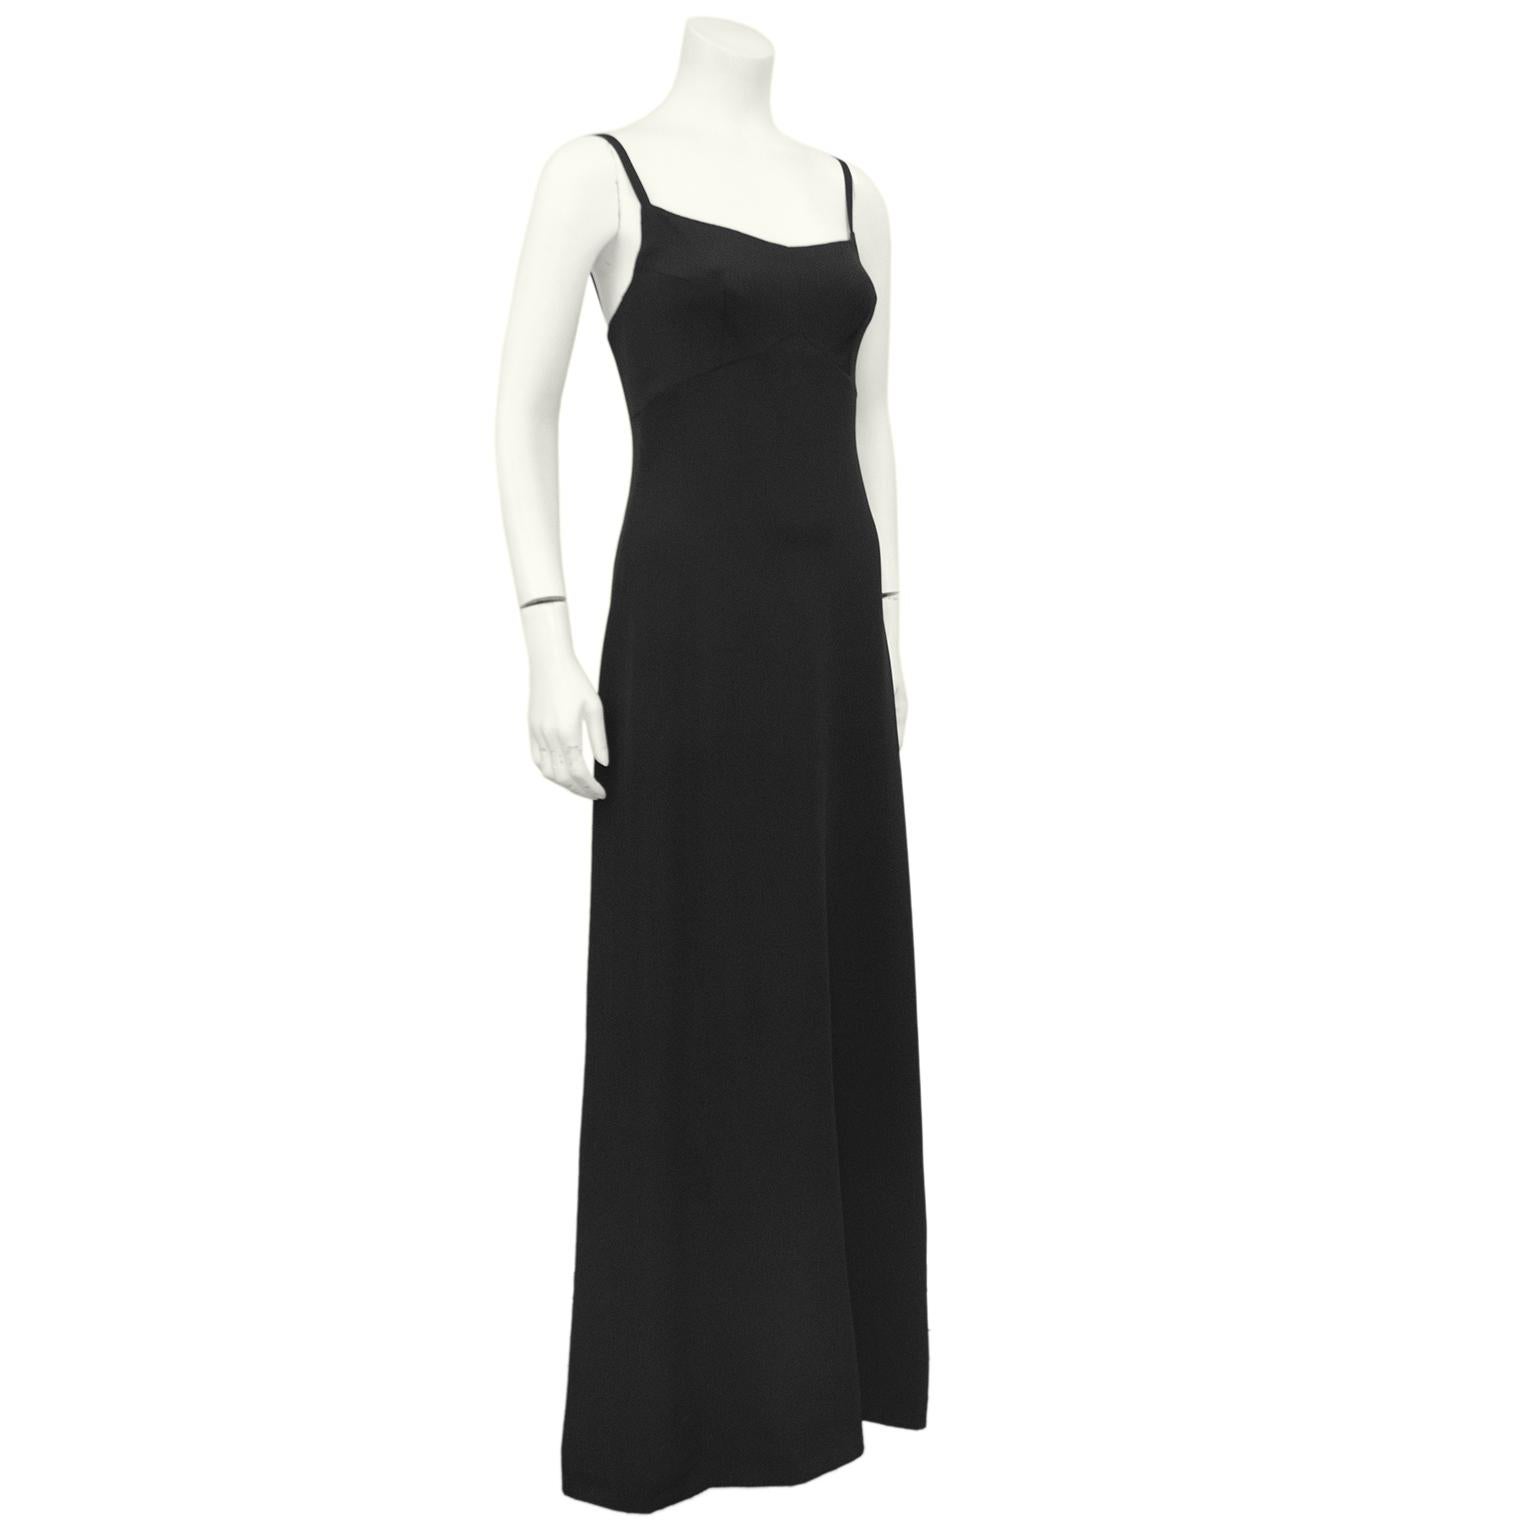 Simple, elegant and timeless. This minimalist Chanel Haute Couture gown from the 1960s is truly breathtaking. Cut from luscious thick black silk, this gown features 1/2